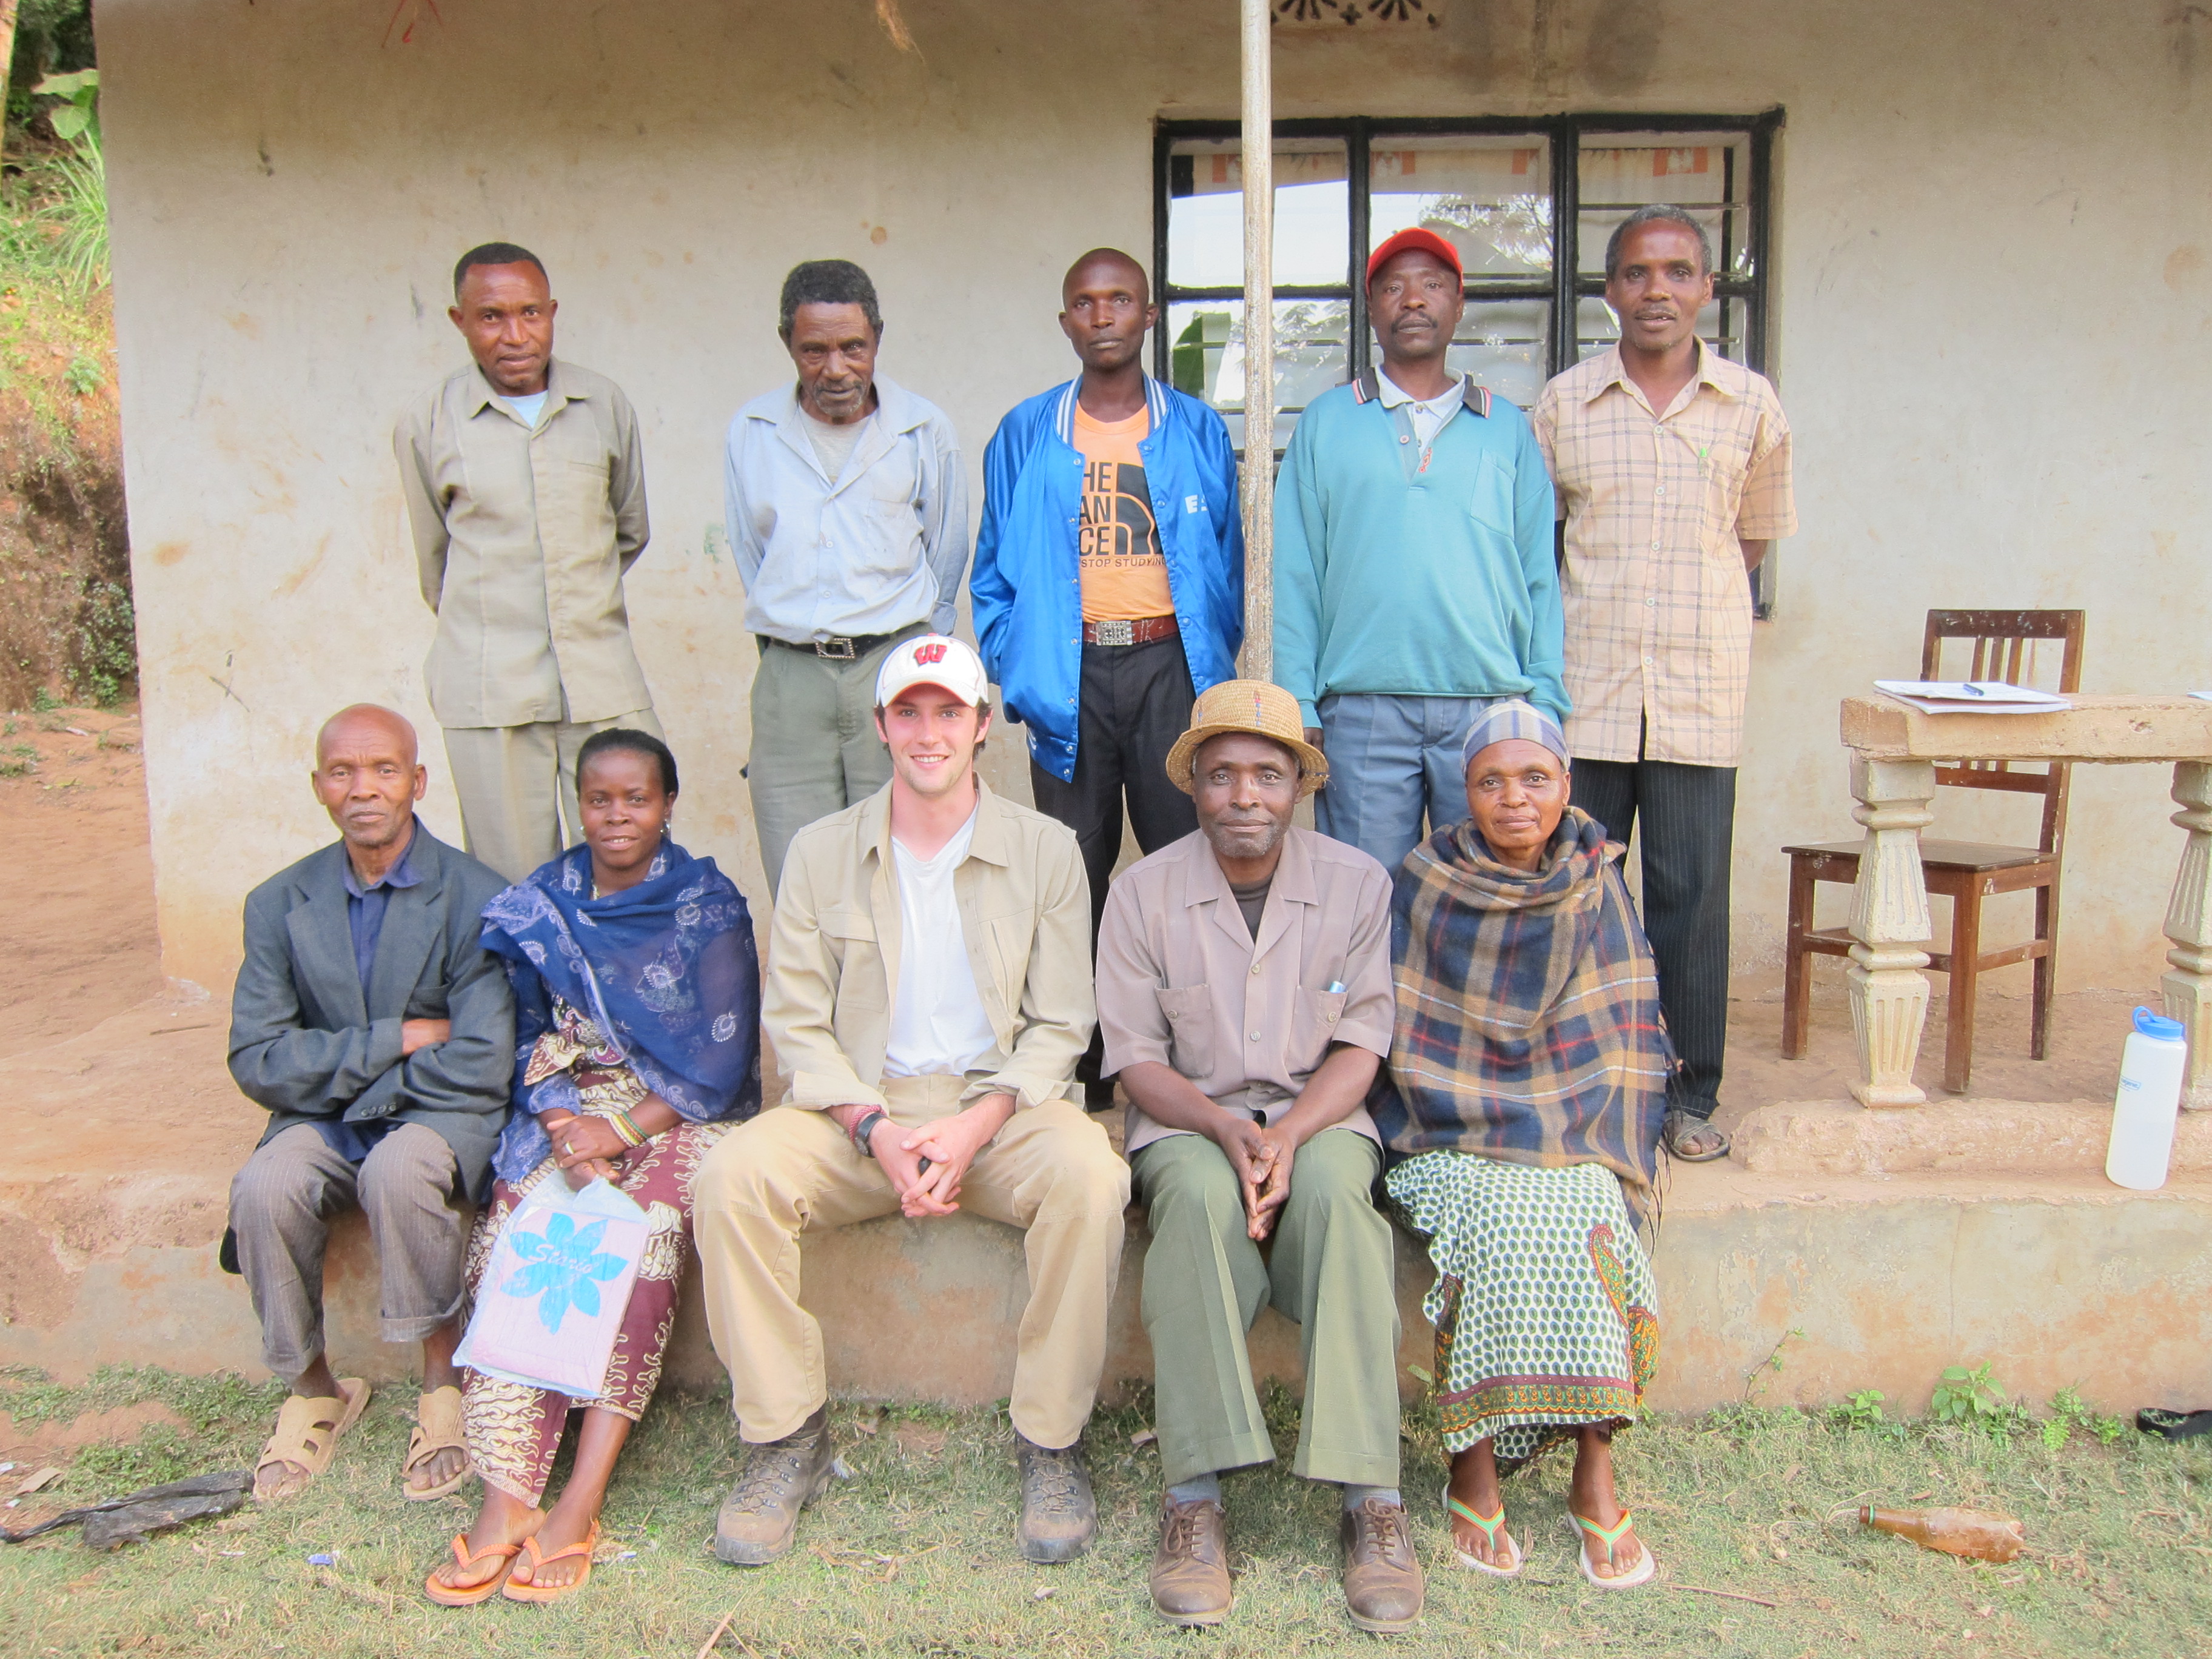 In 2013 Levitt Research Fellow Eren Shultz '15 researched development in Tanzania to understand the current and future roles of cooperative organizations.